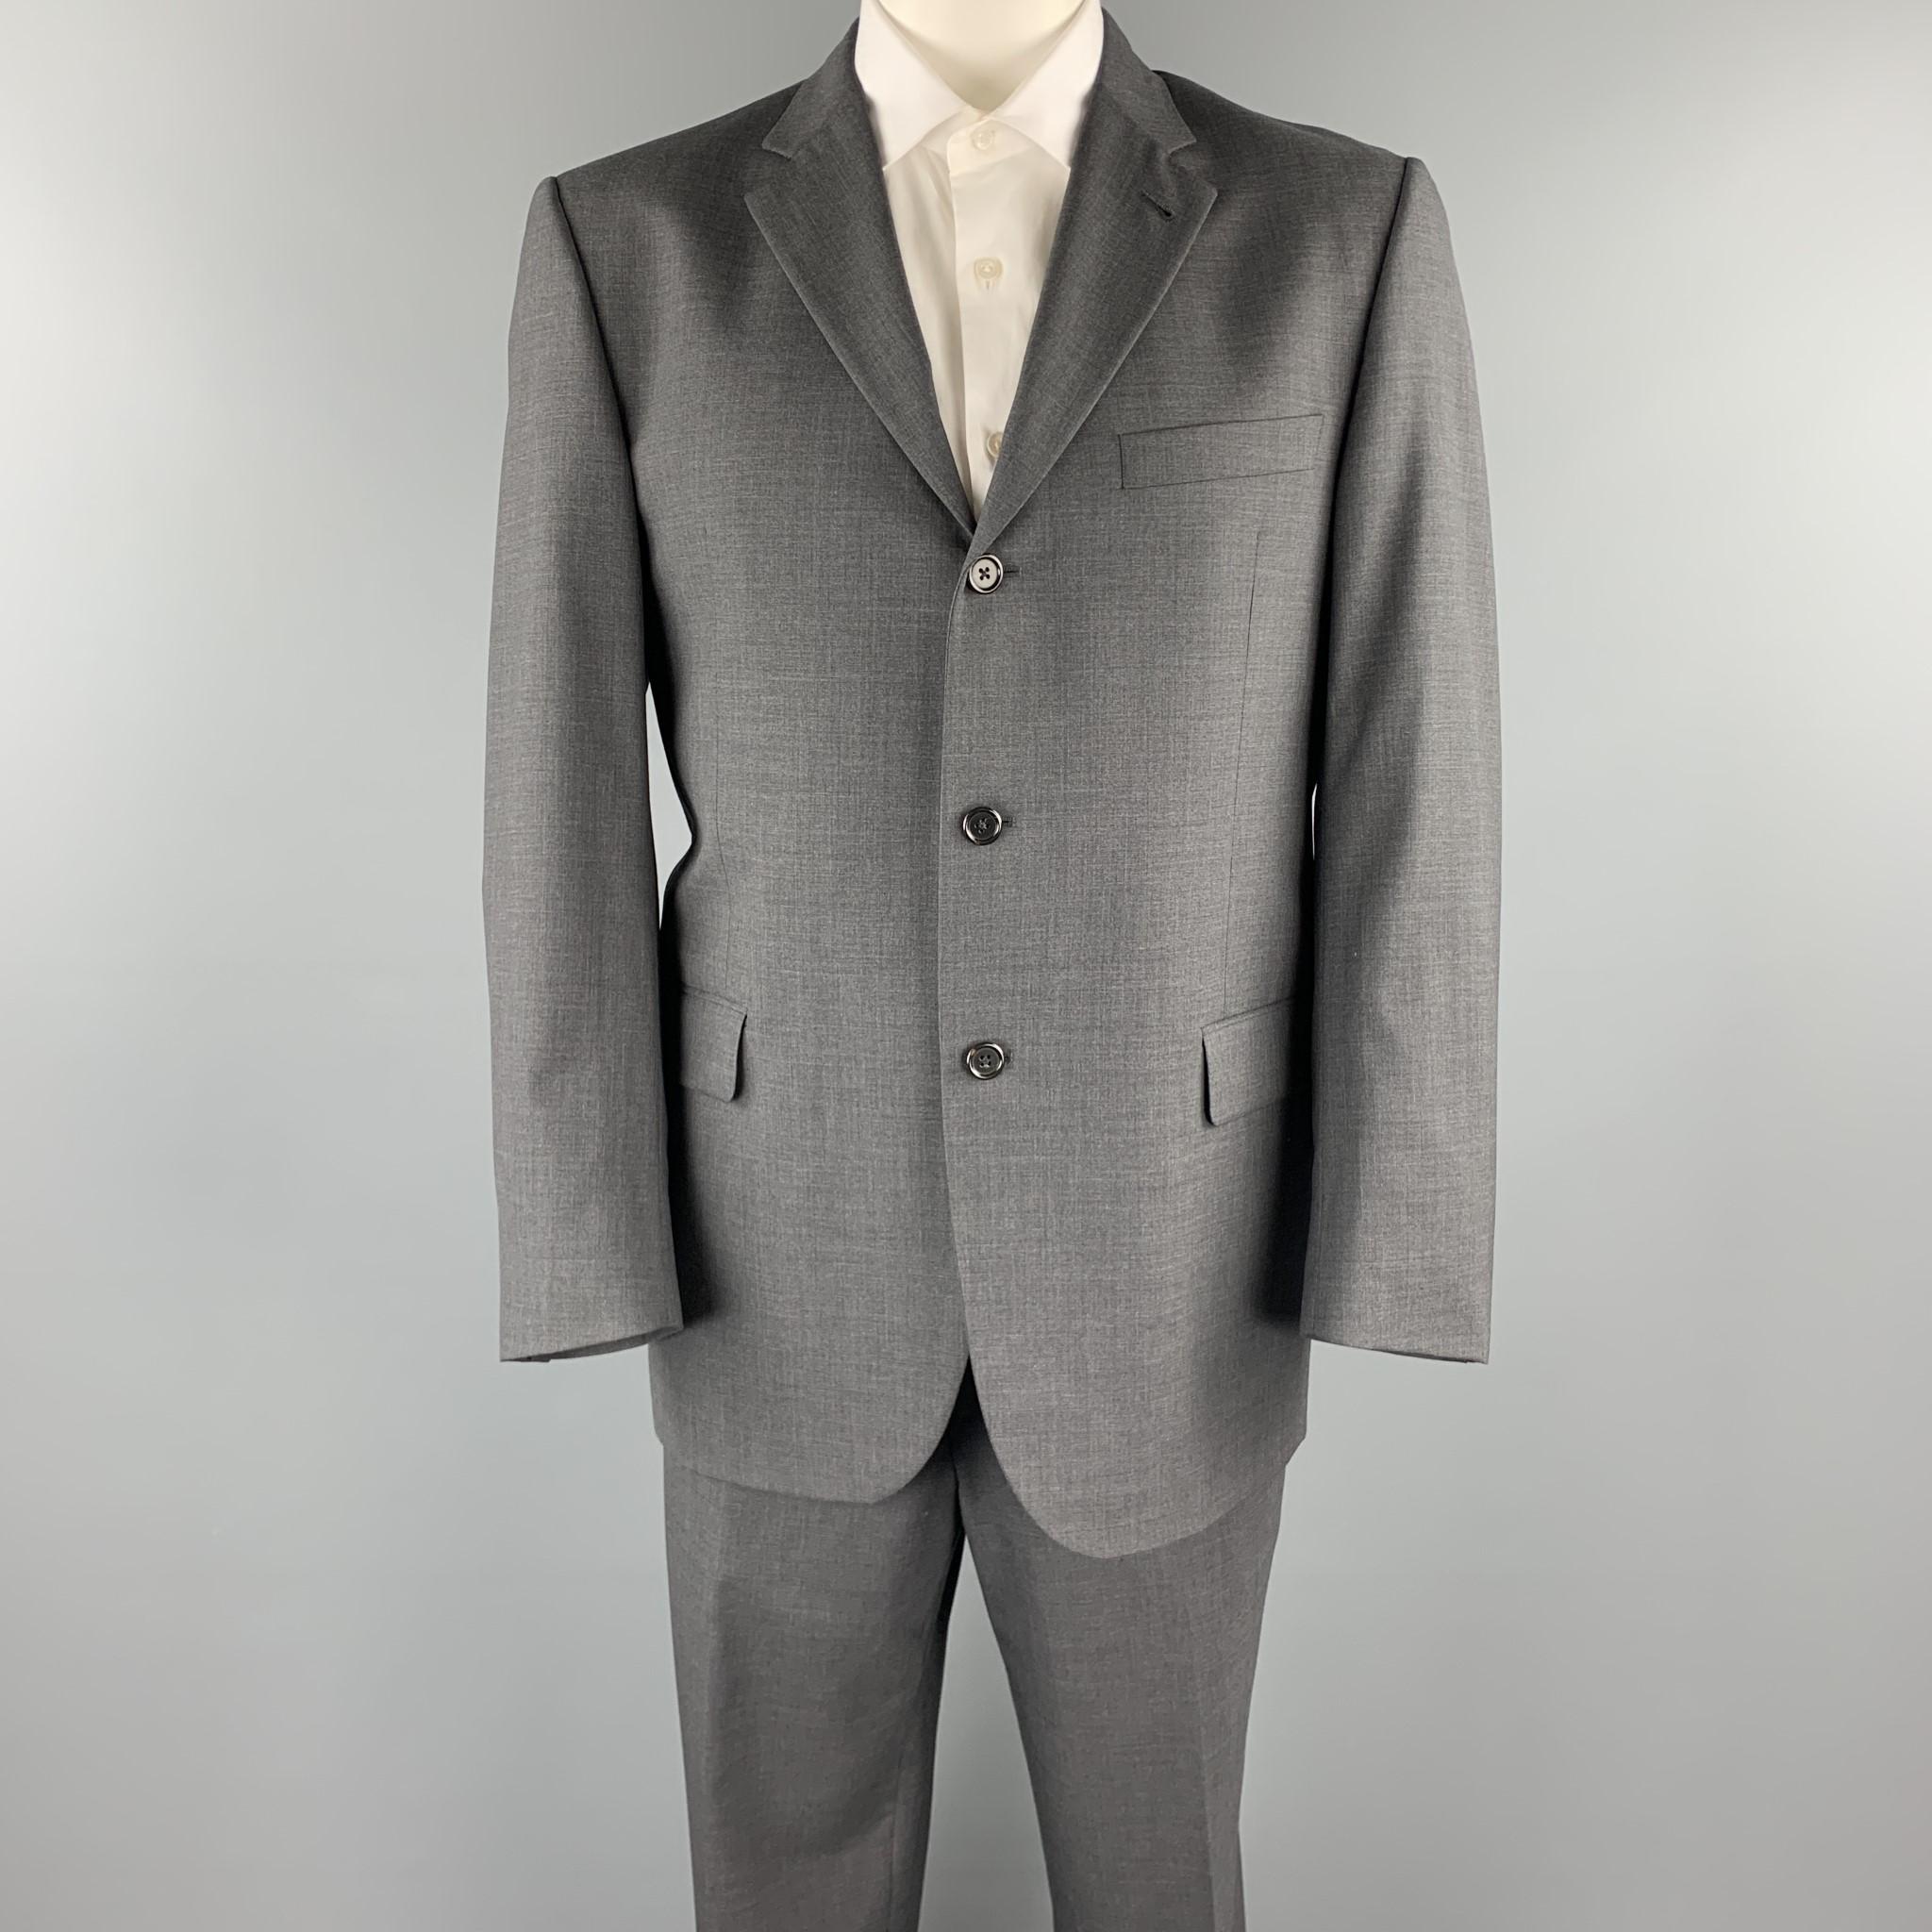 BURBERRY LONDON suit comes in a dark gray wool and includes a single breasted, three button sport coat with a notch lapel and matching flat front trousers. Made in USA.

Excellent Pre-Owned Condition.
Marked: 42 R

Measurements:

-Jacket
Shoulder: